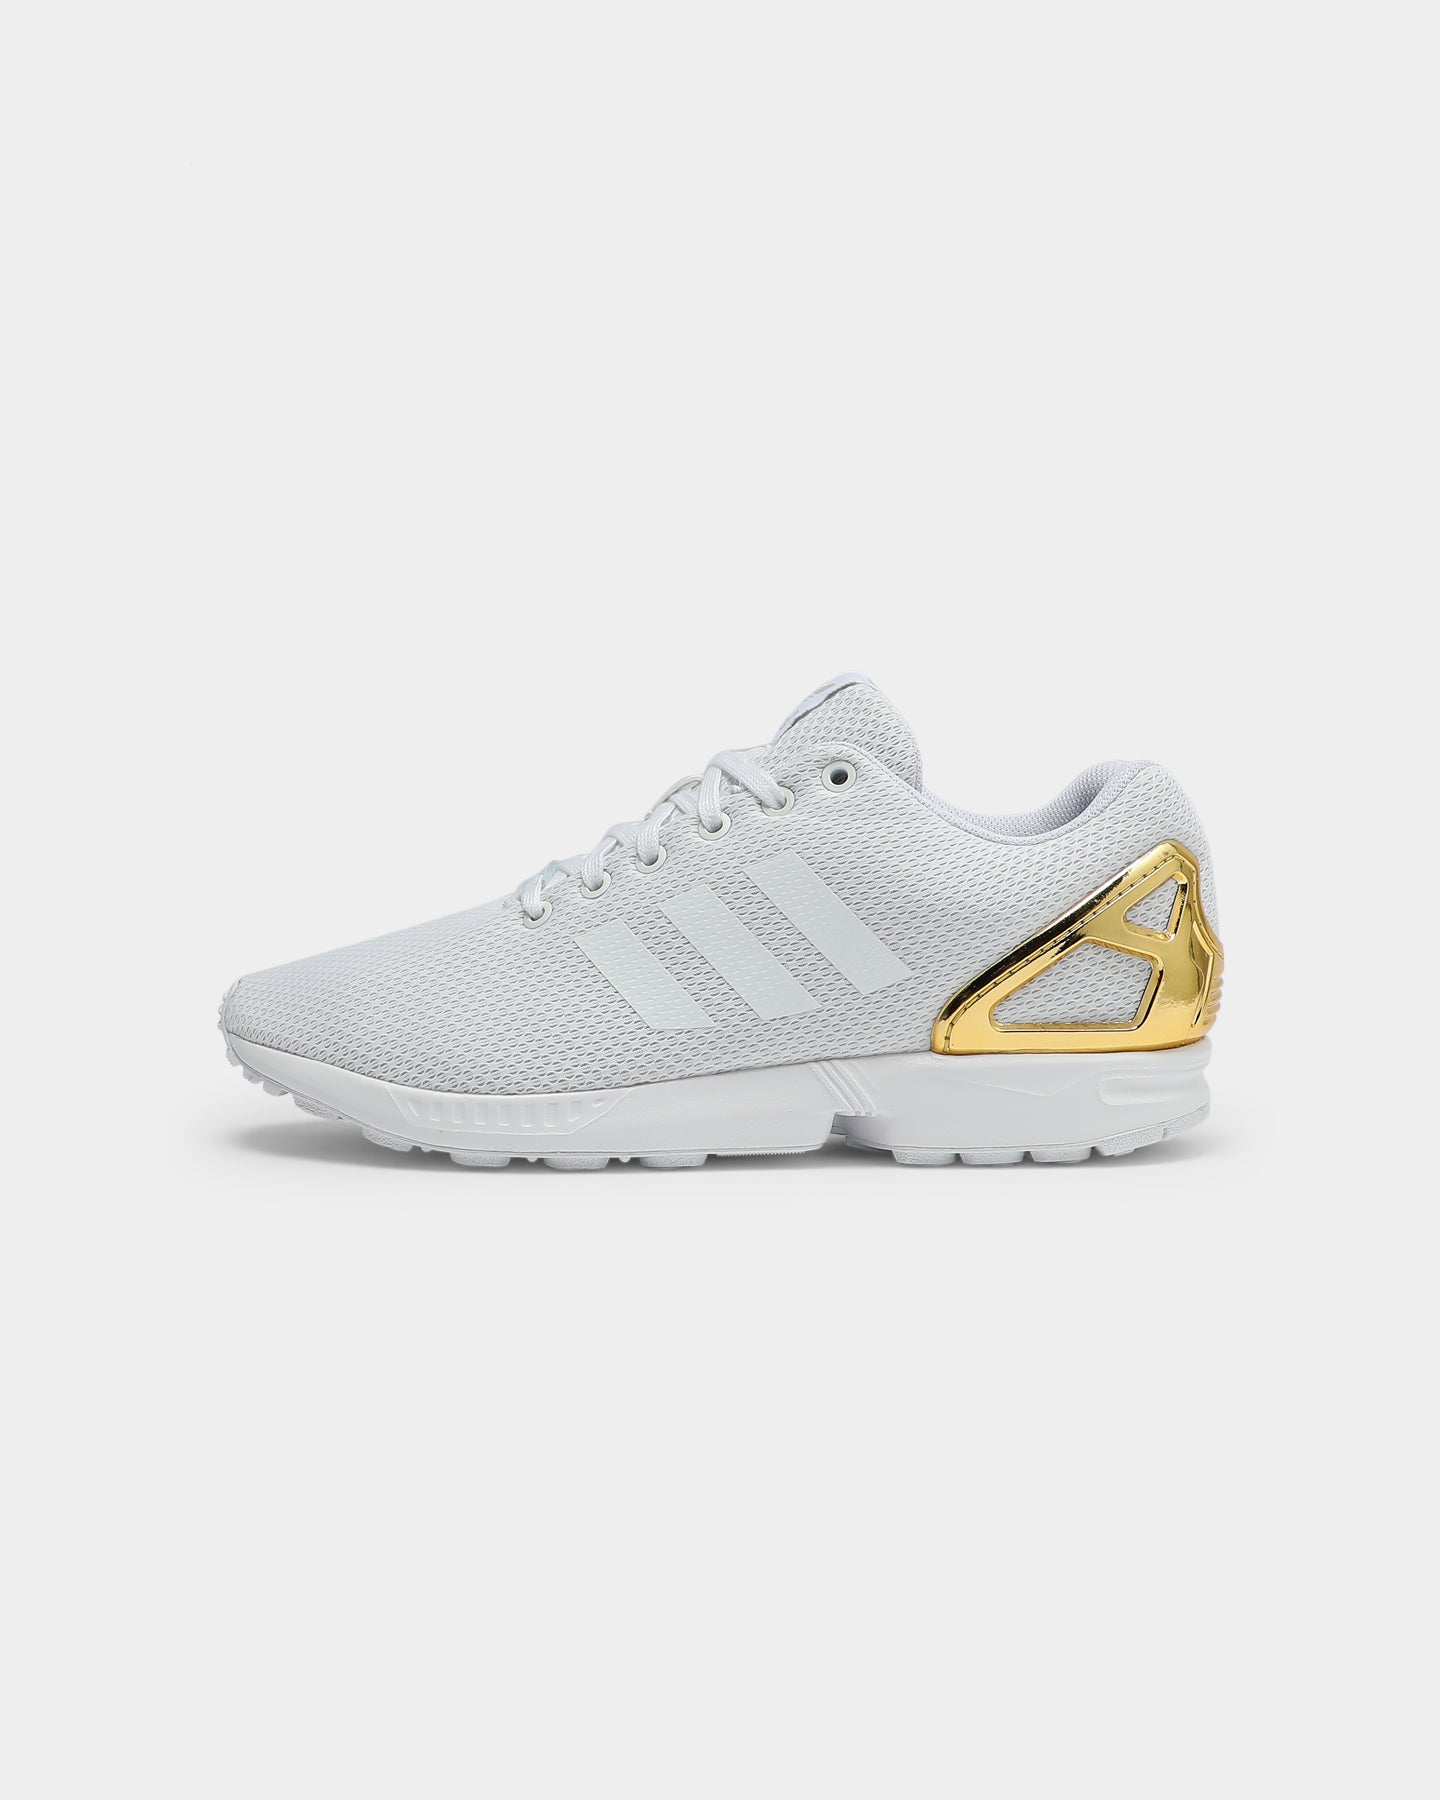 Adidas ZX Flux White/Gold | Culture 